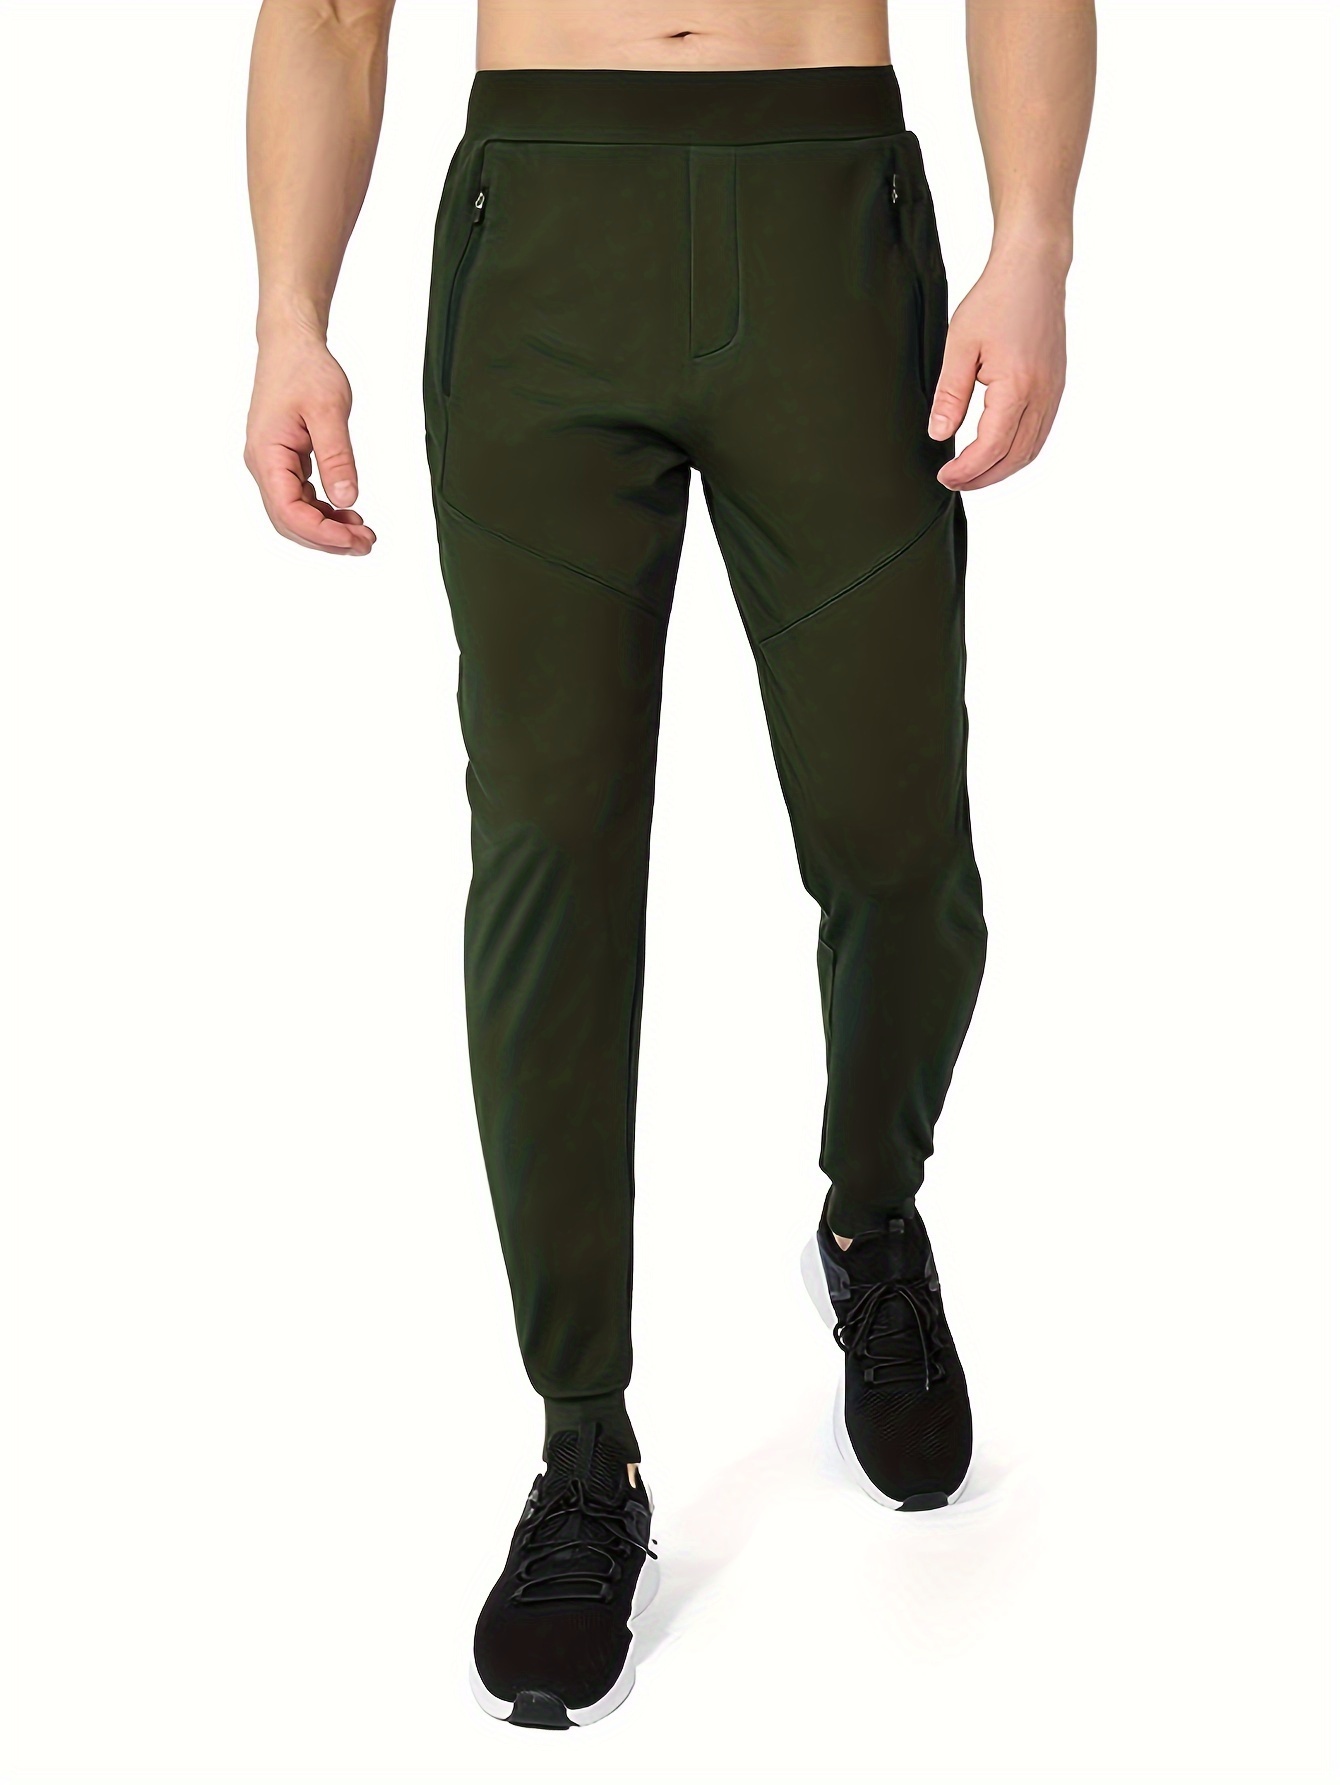 Men's Joggers Pants Athletic Running Sweatpants Workout Gym Fitness Trousers